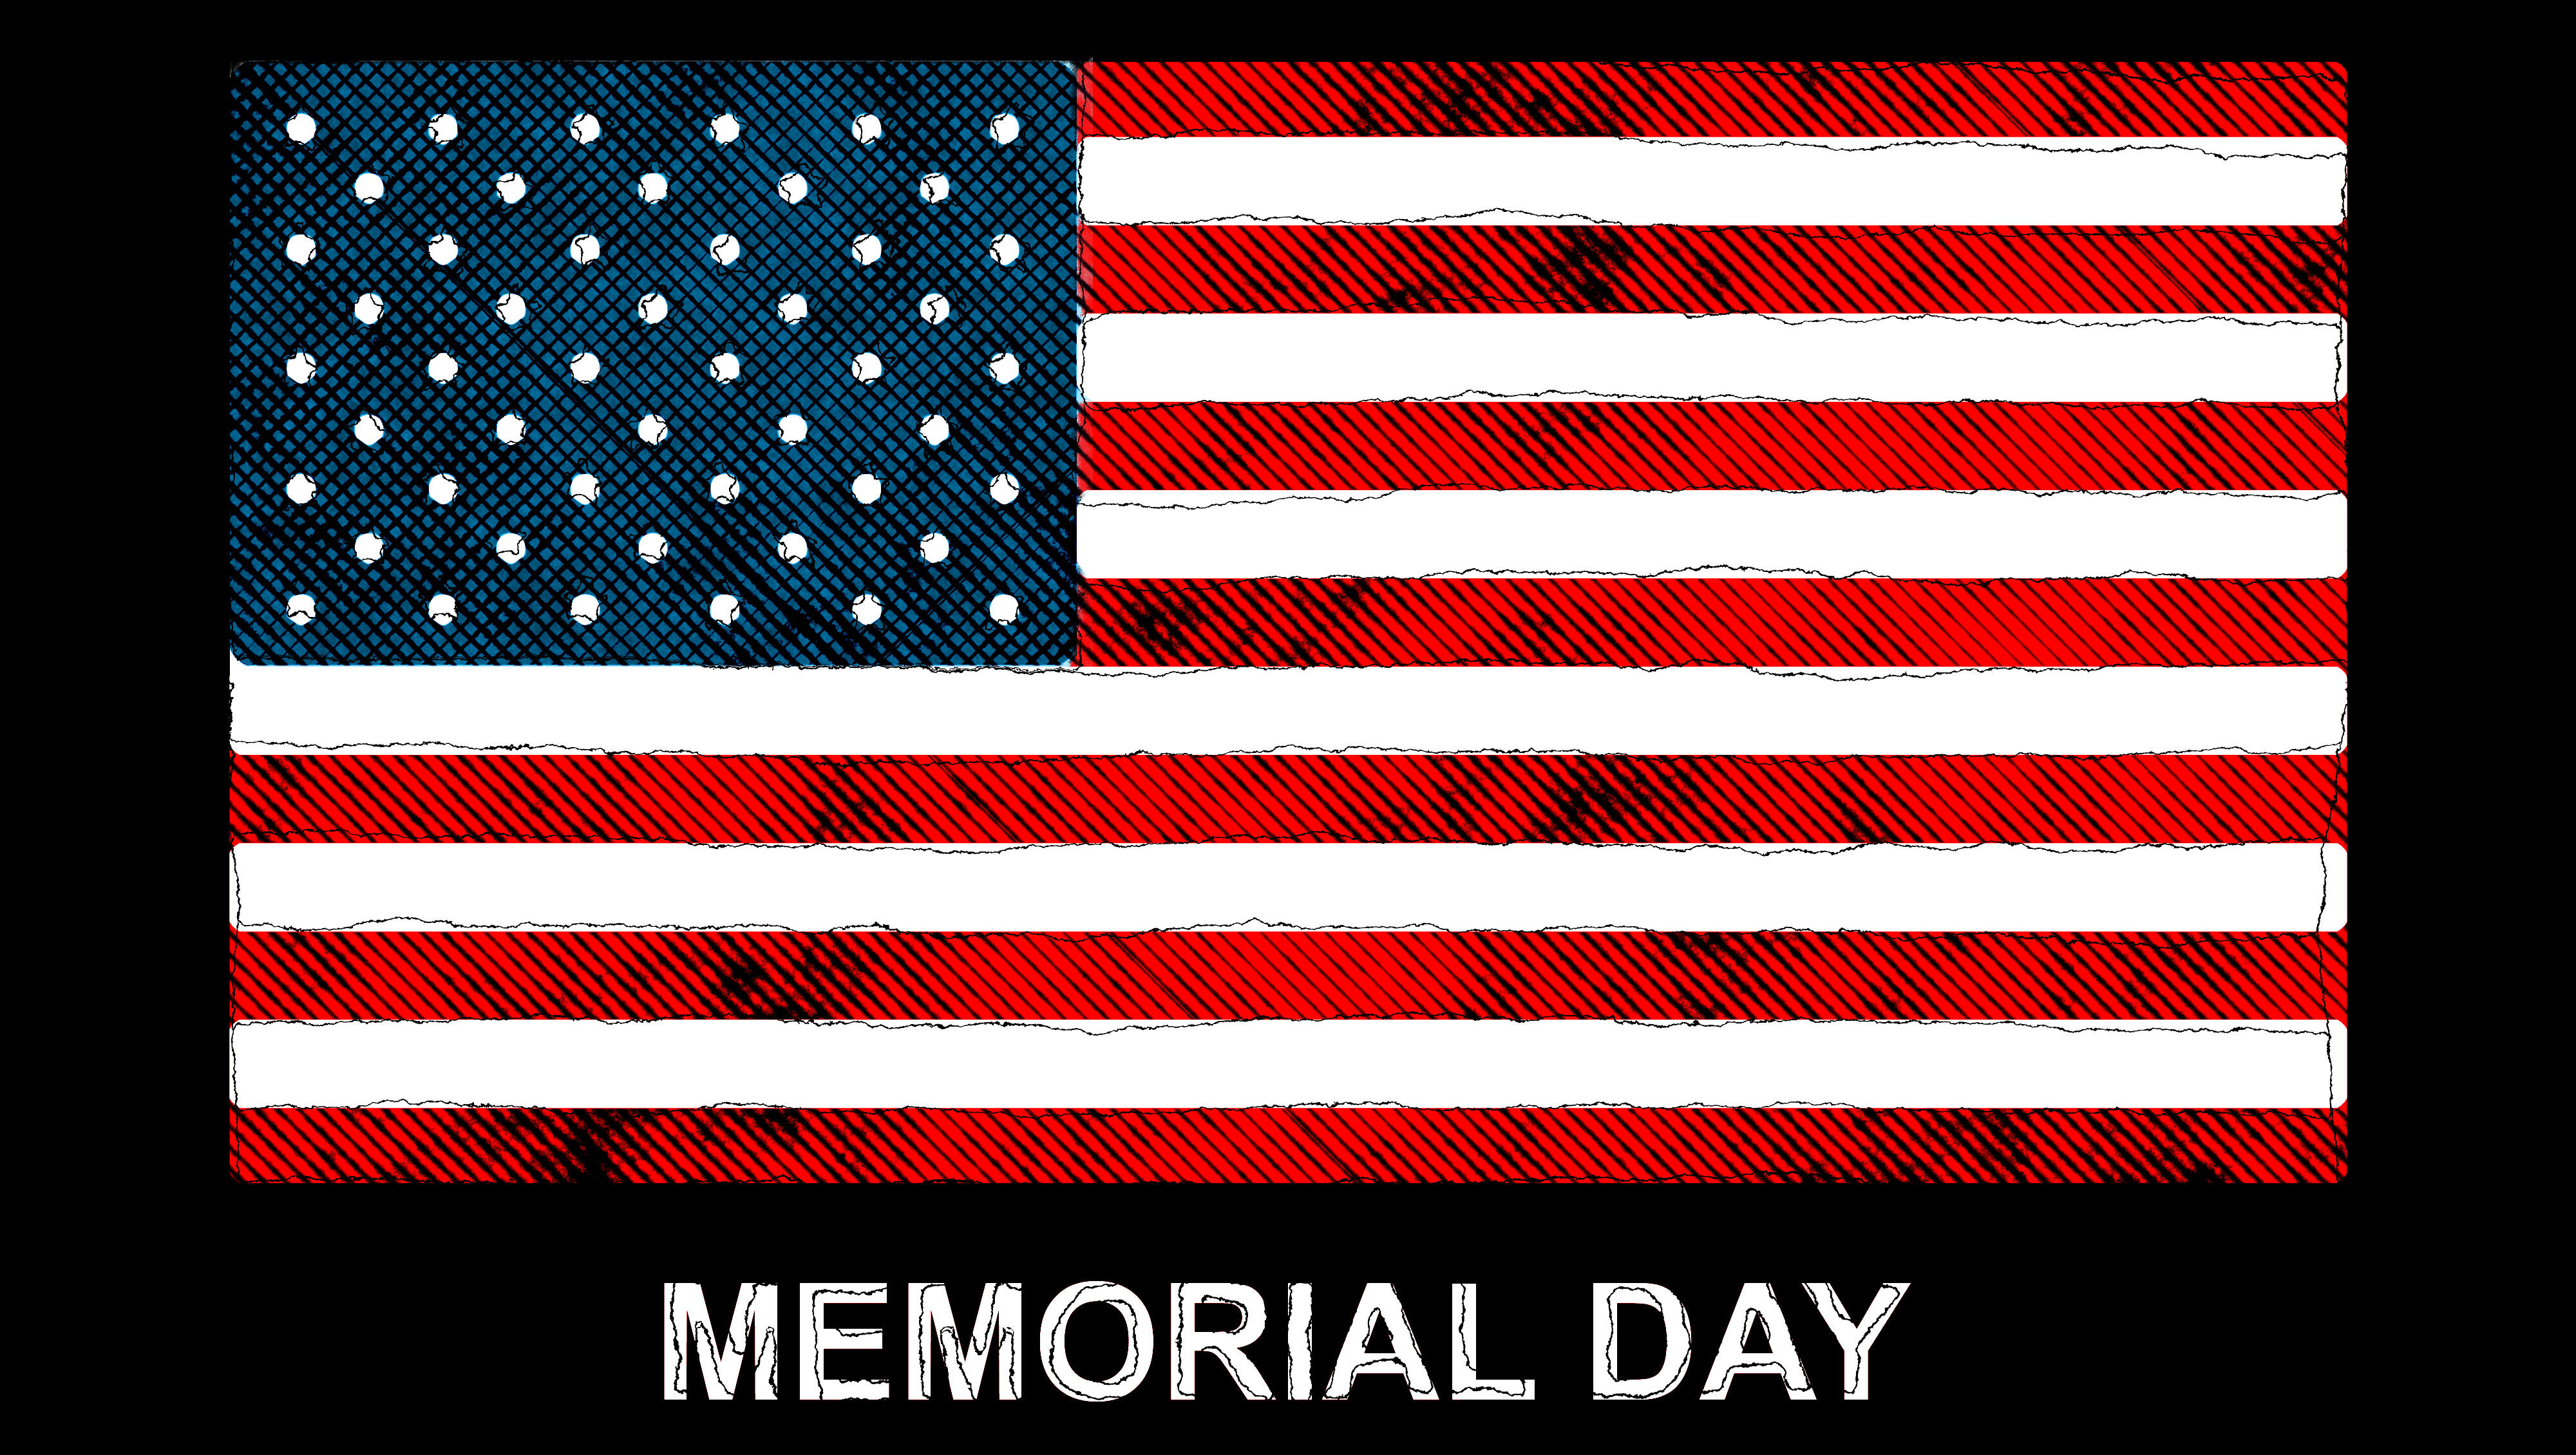 Memorial Day: Discounts, Deals, and Free Meals for Veterans and Military